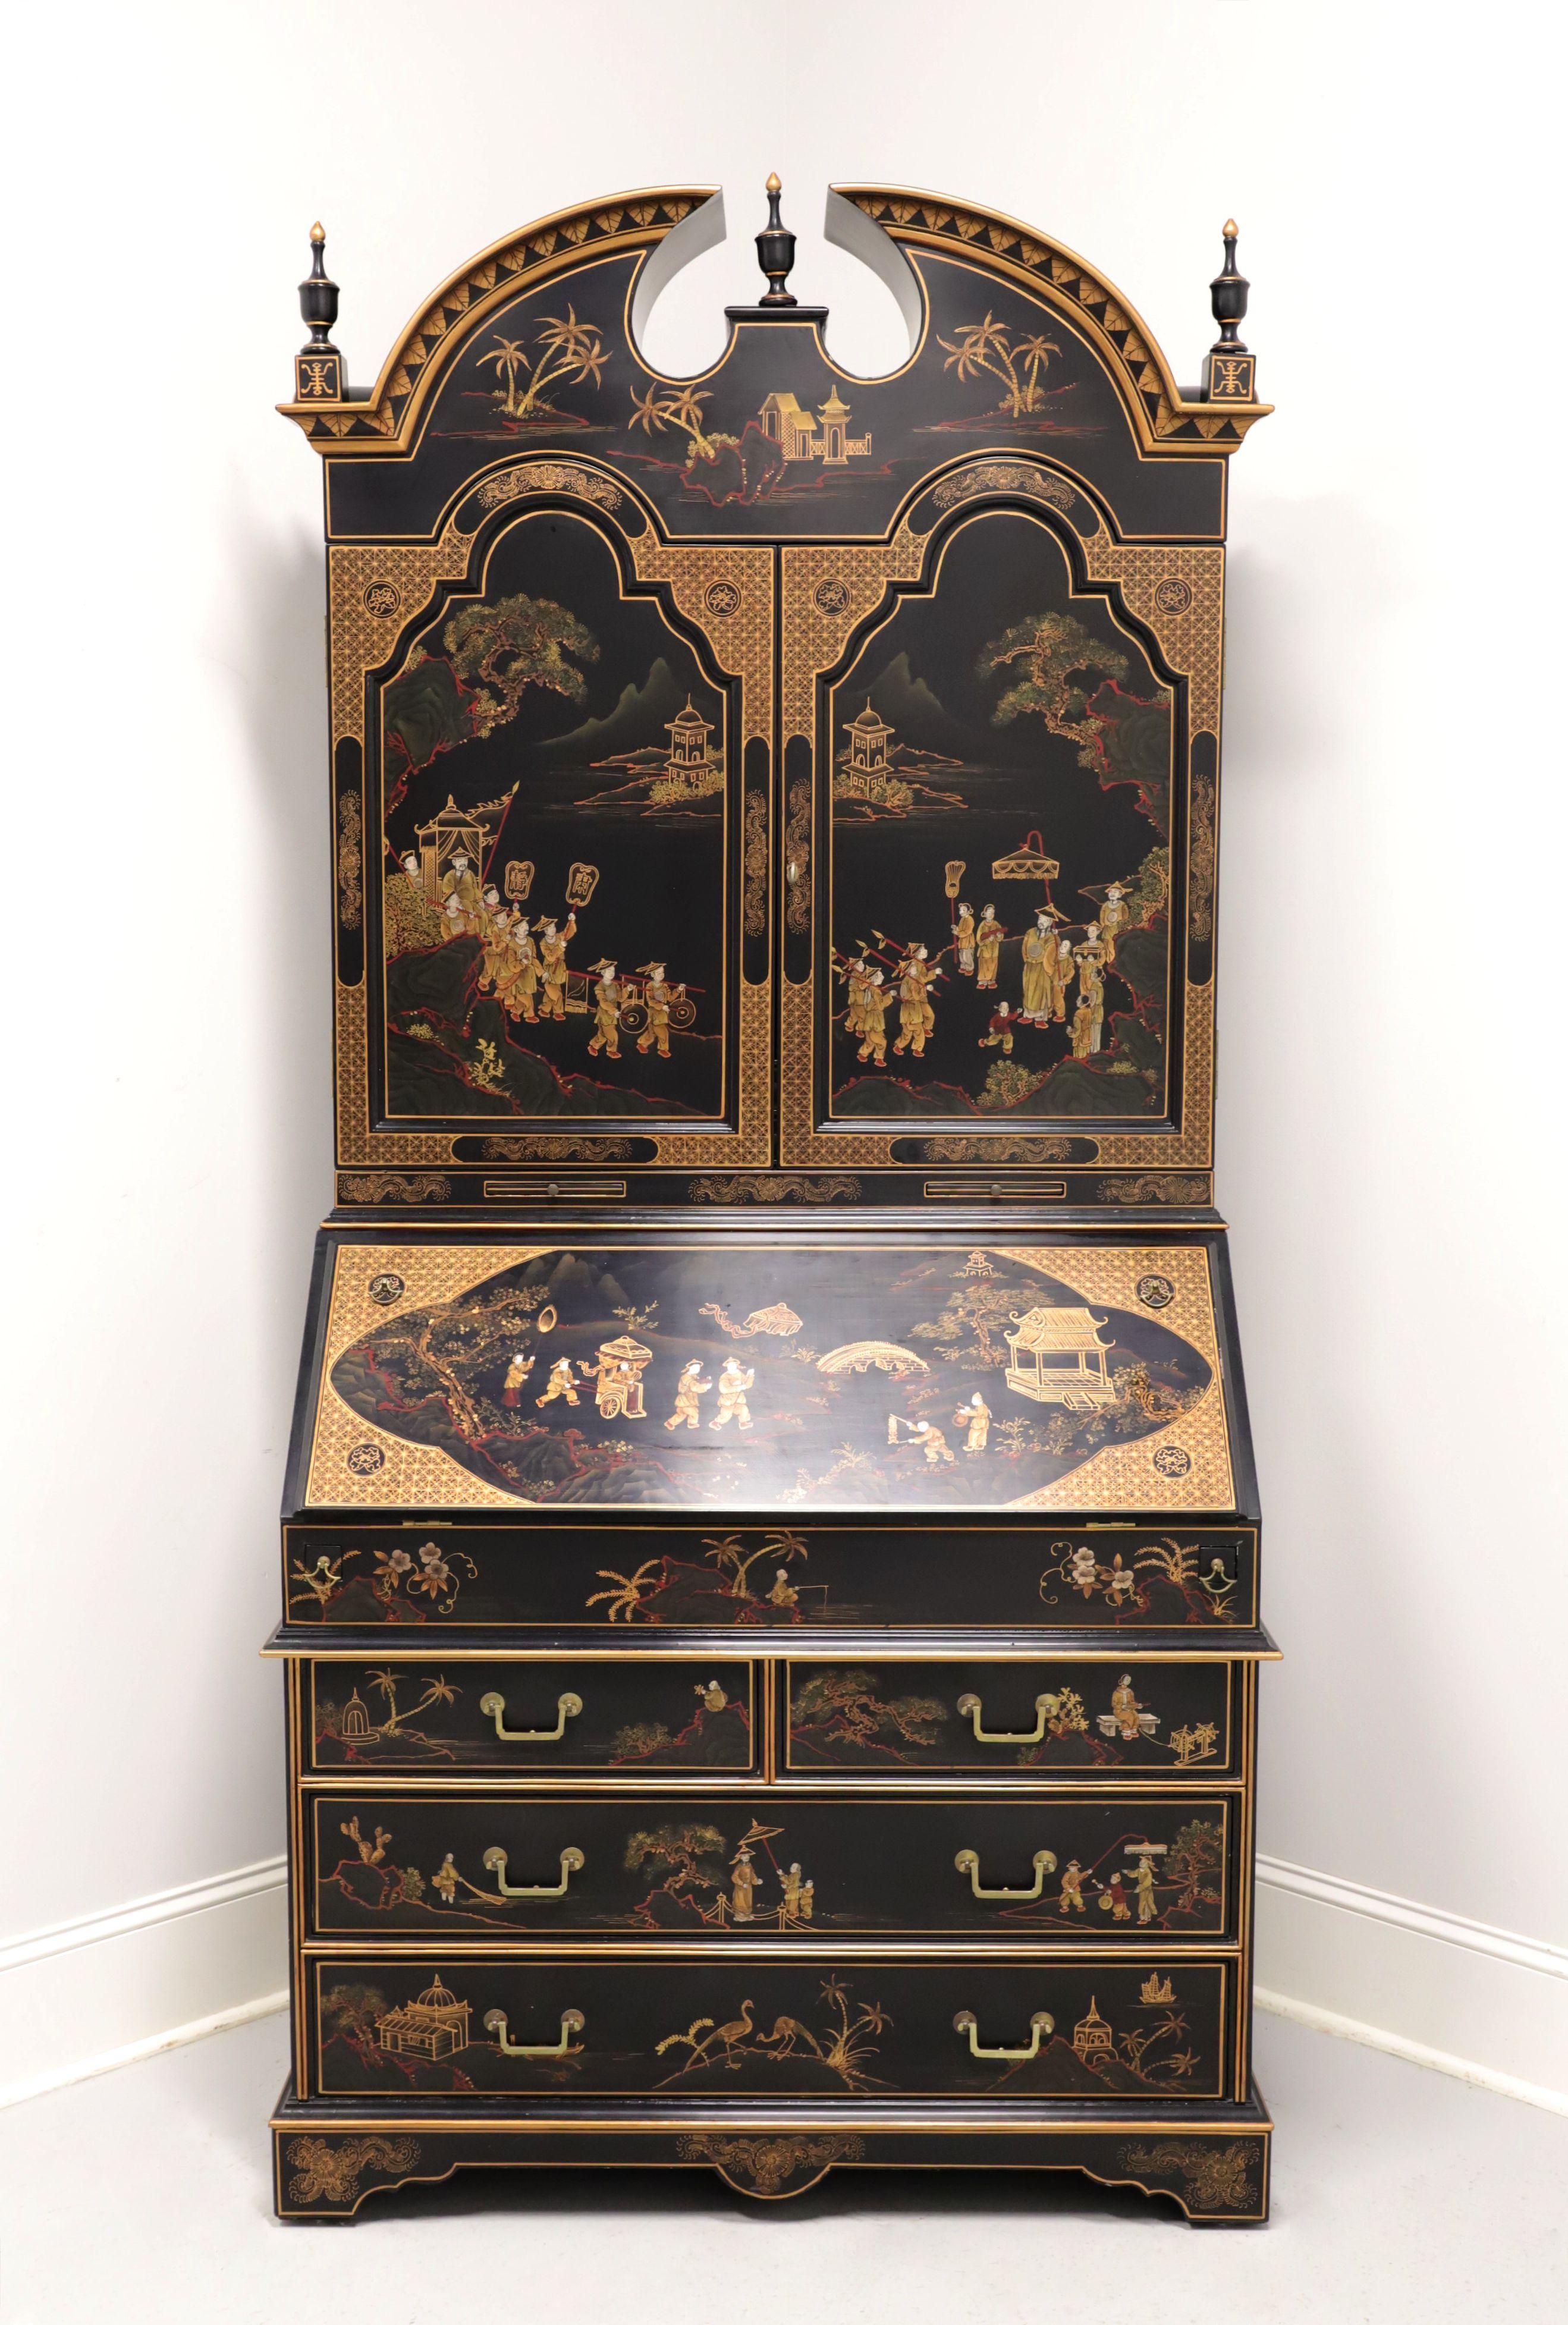 An Asian Chinoiserie style secretary desk, unbranded, similar in quality to Drexel. Solid wood with black lacquer & gold accents, hand painted Chinoiserie scenes, double bonnet arched top with crescent pediment & three finials, brass hardware and